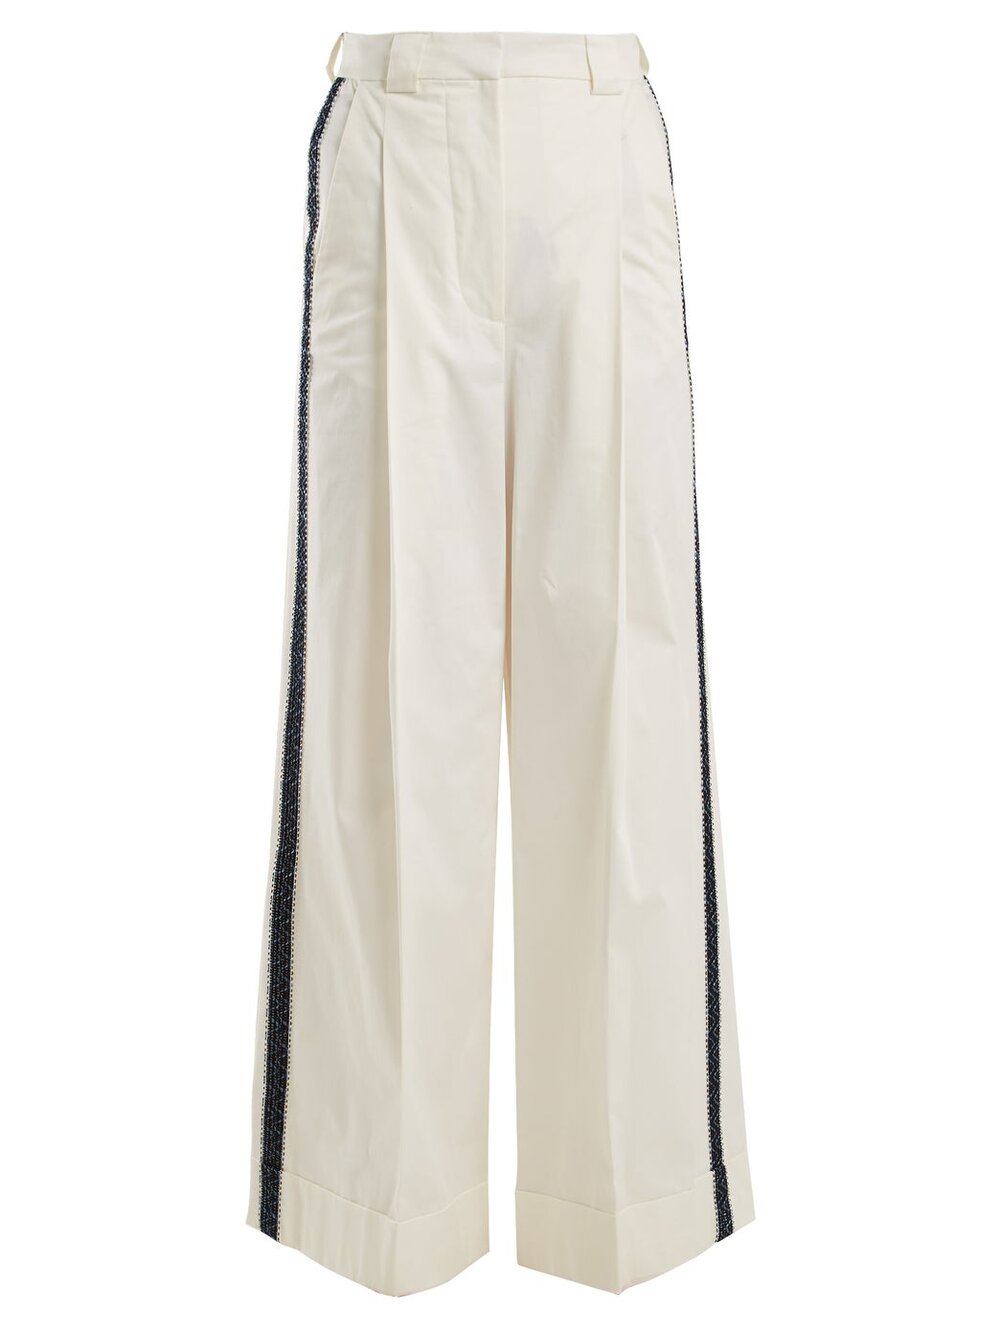 RELAXED PANT